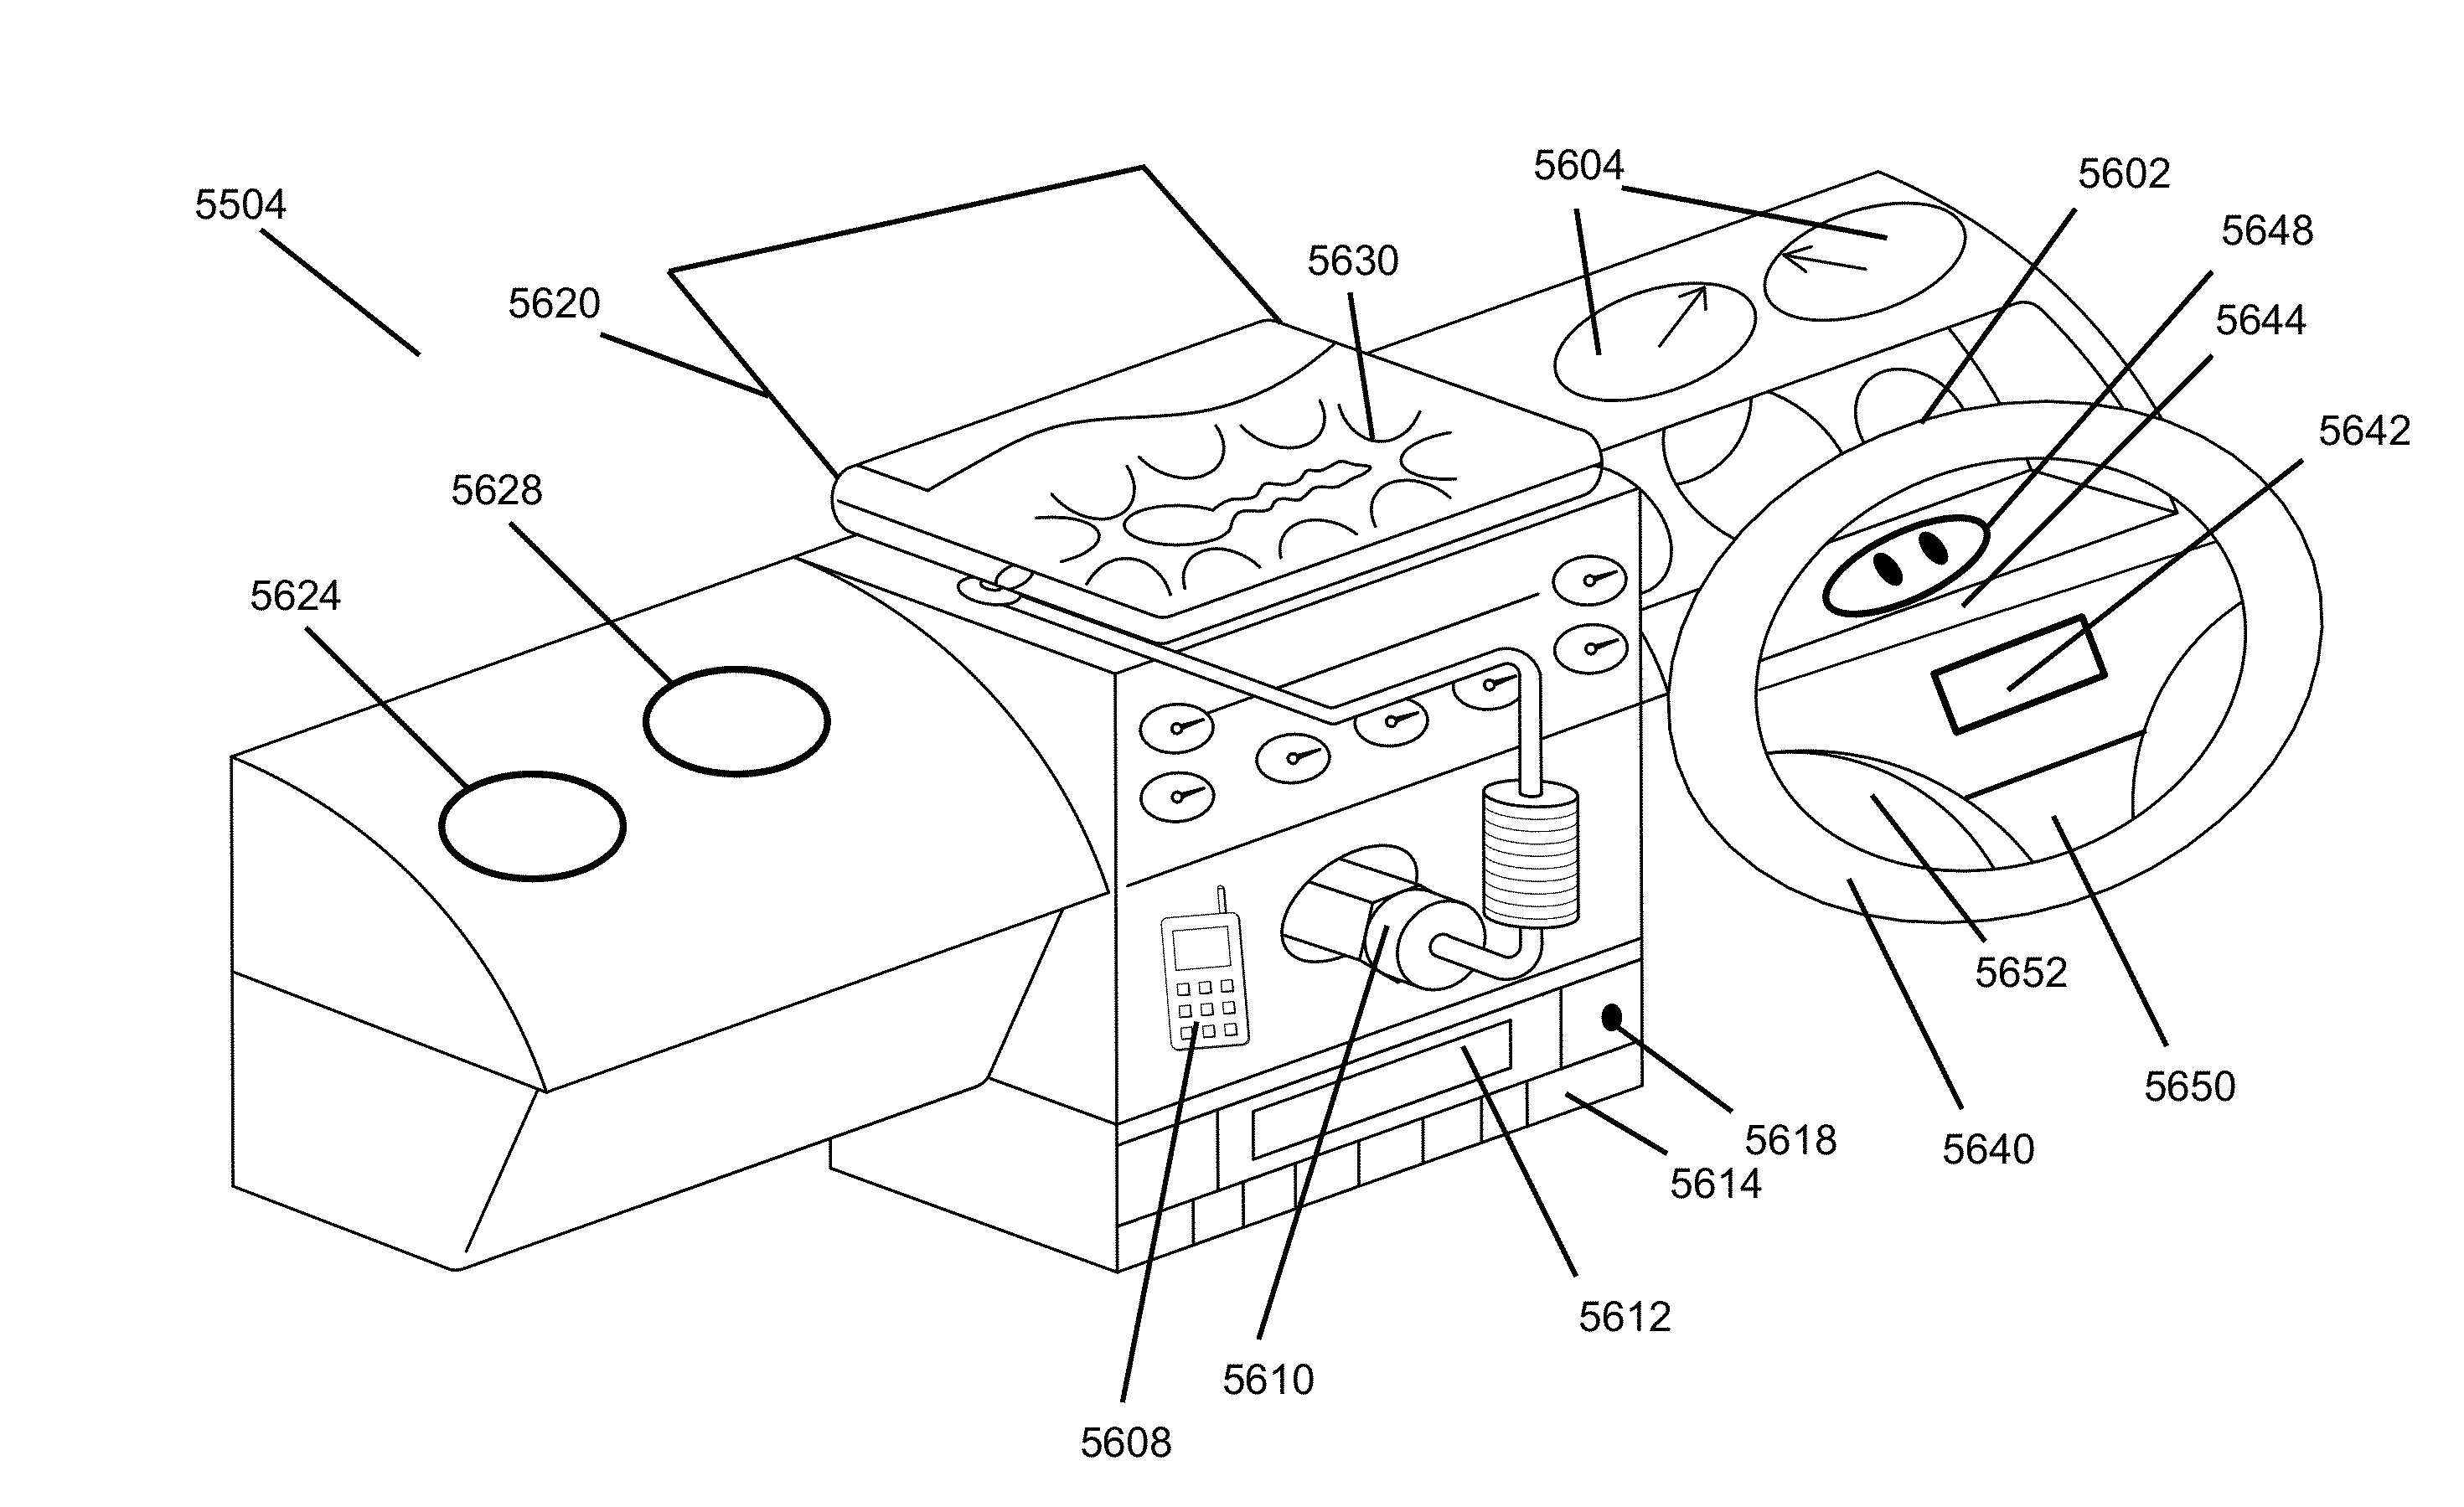 Series relayed wireless power transfer in a vehicle